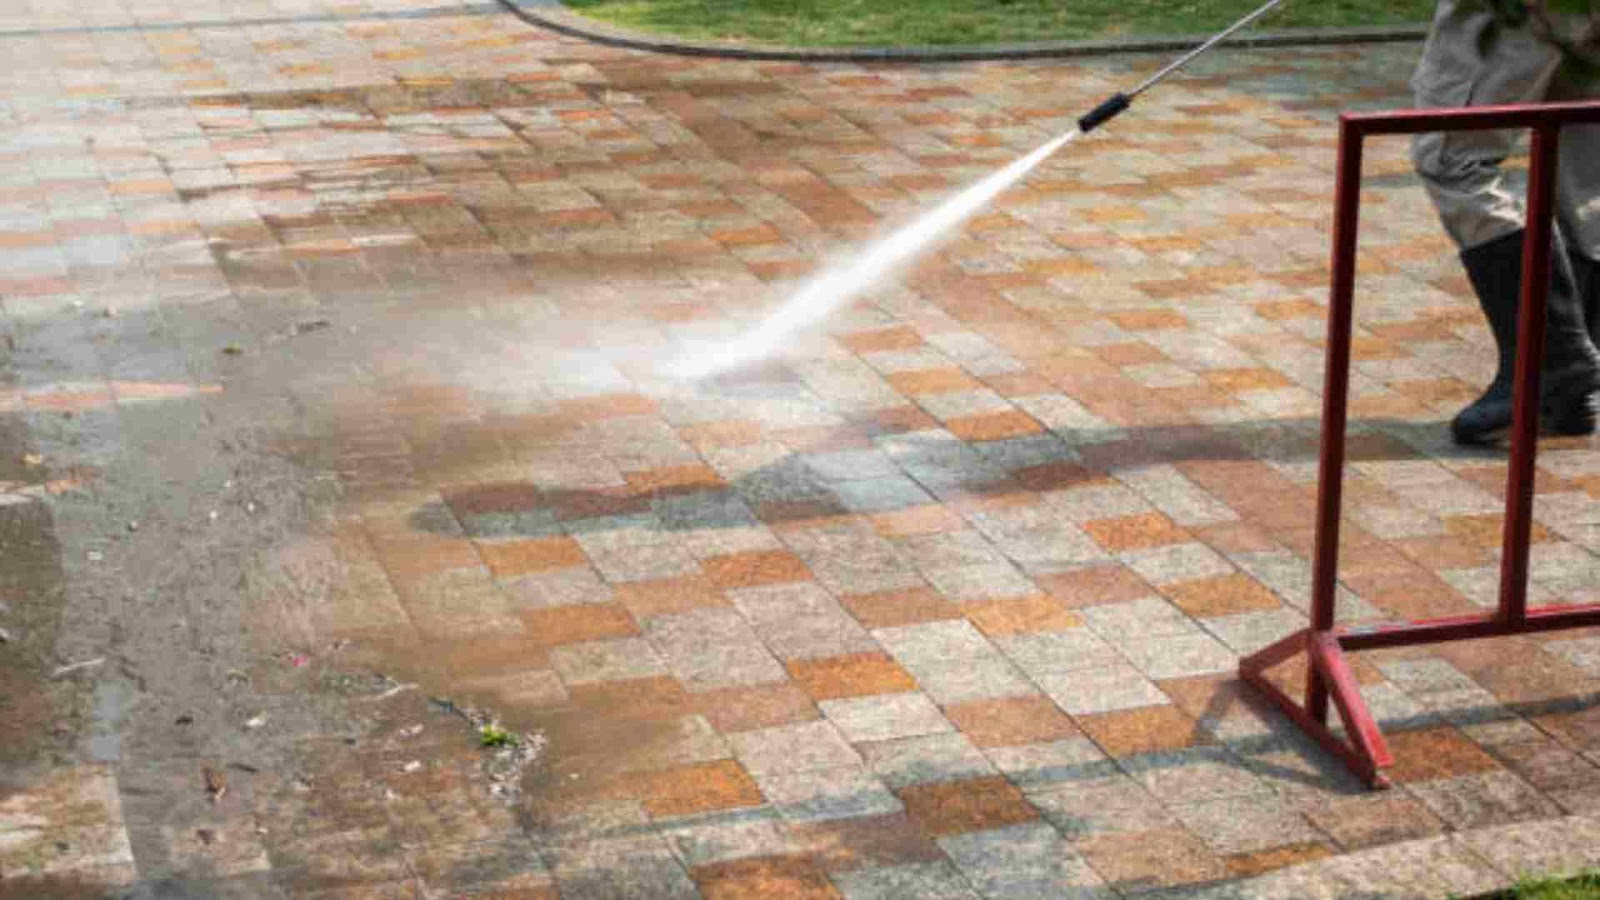 What are some tips to Pressure Wash a Driveway?